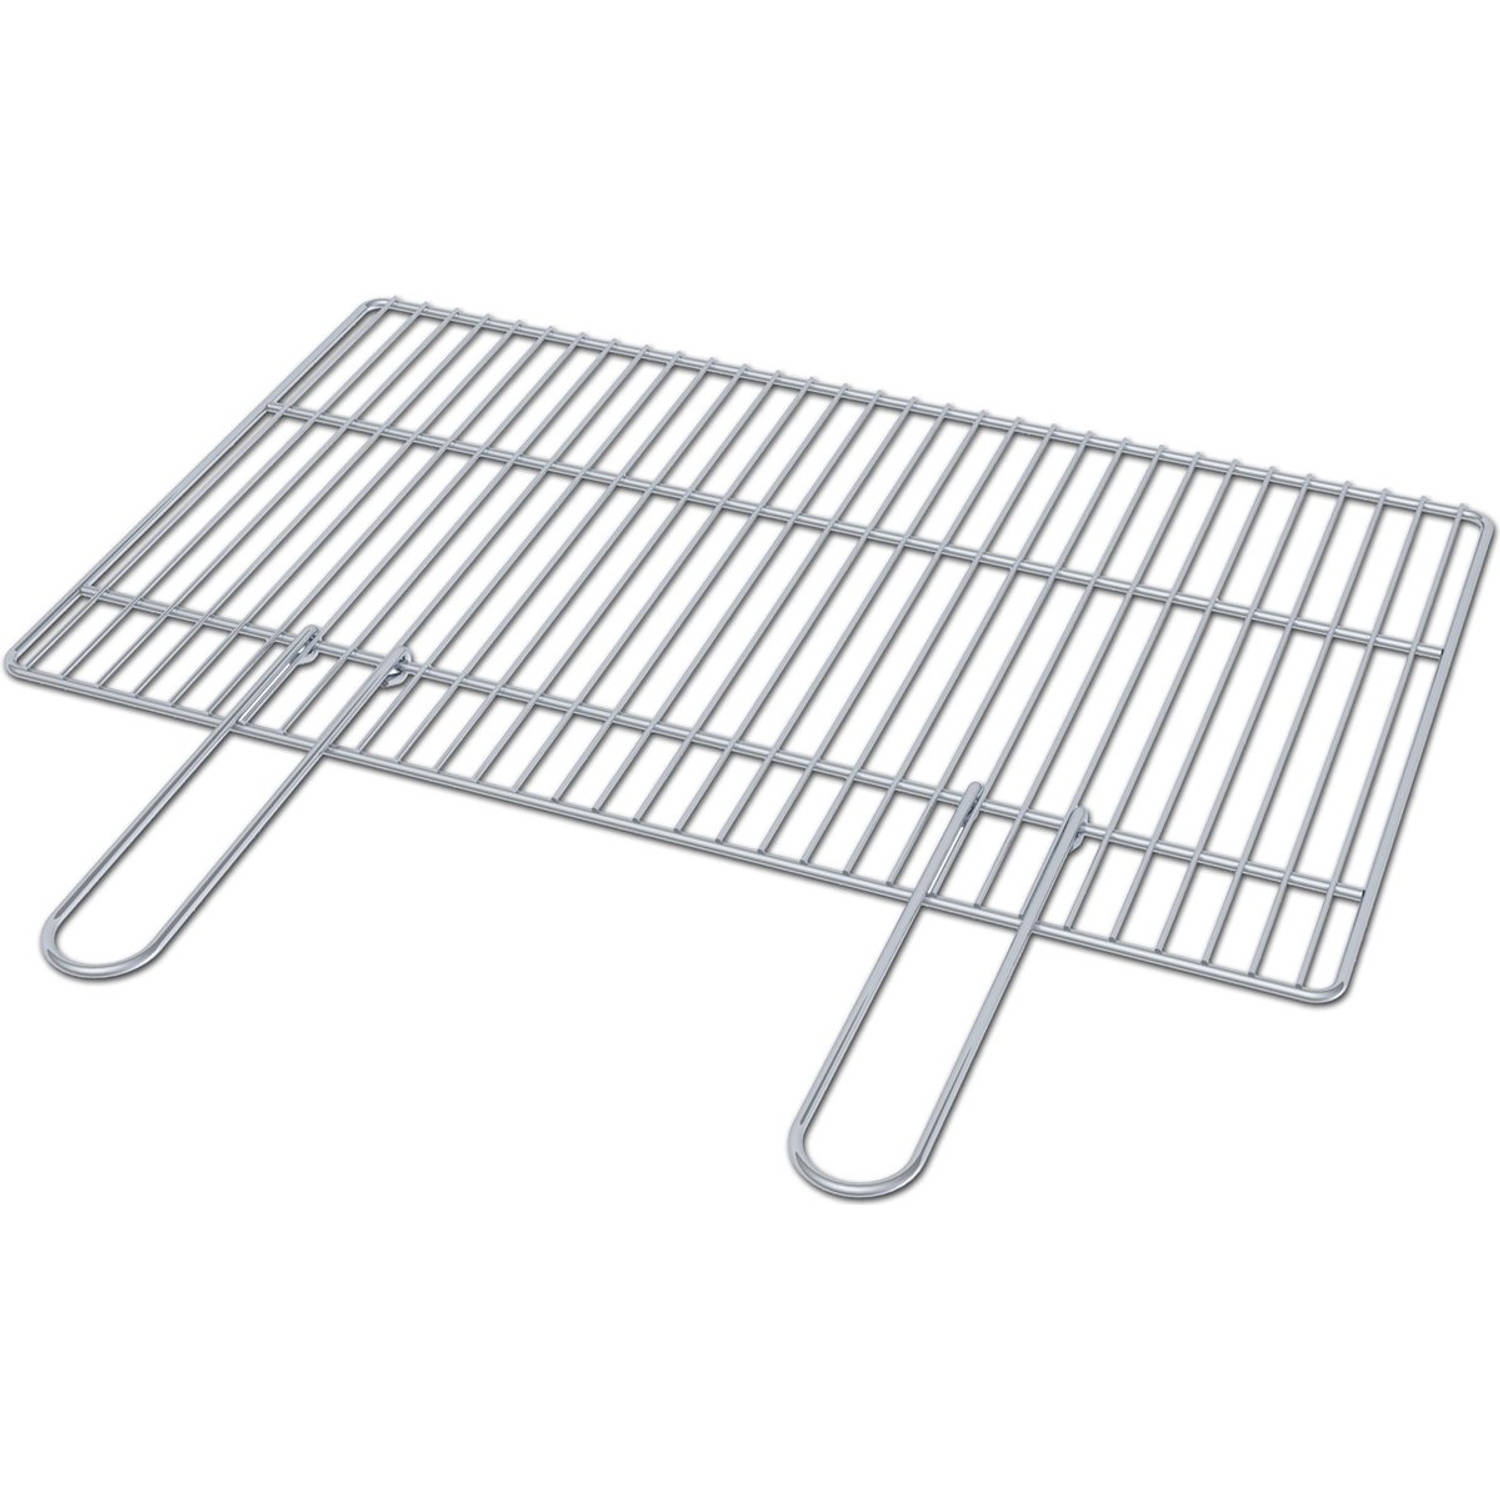 Speels kalf Abstractie Sarom Fuoco - Barbecue Grill - Verchroomd - 67x40 cm - Extra stevig |  Blokker